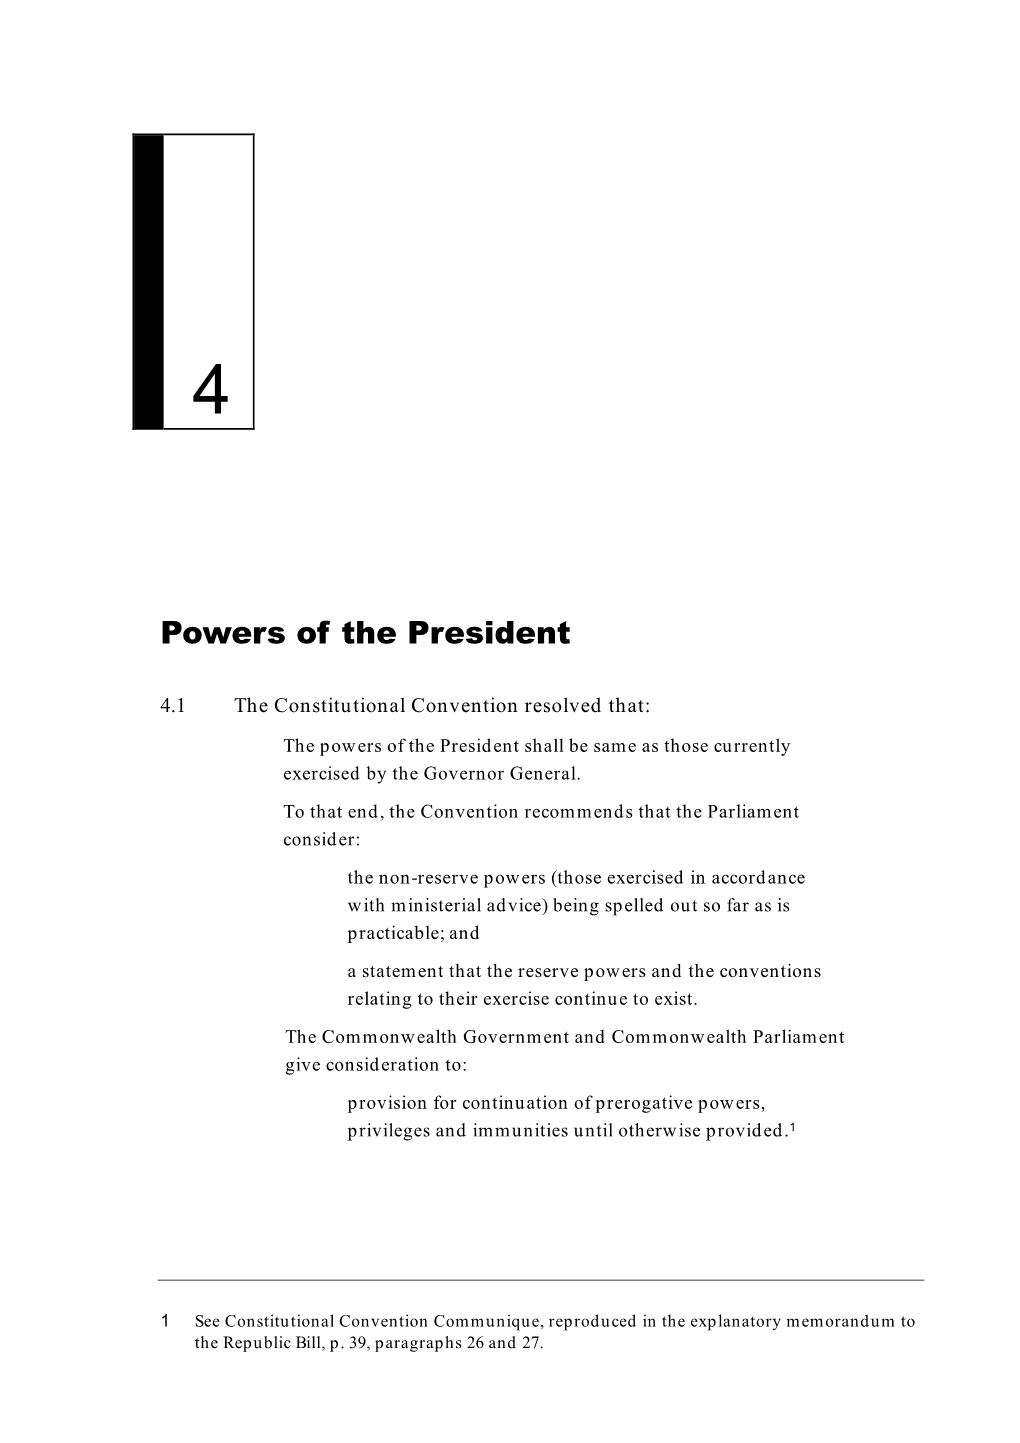 Powers of the President Shall Be Same As Those Currently Exercised by the Governor General